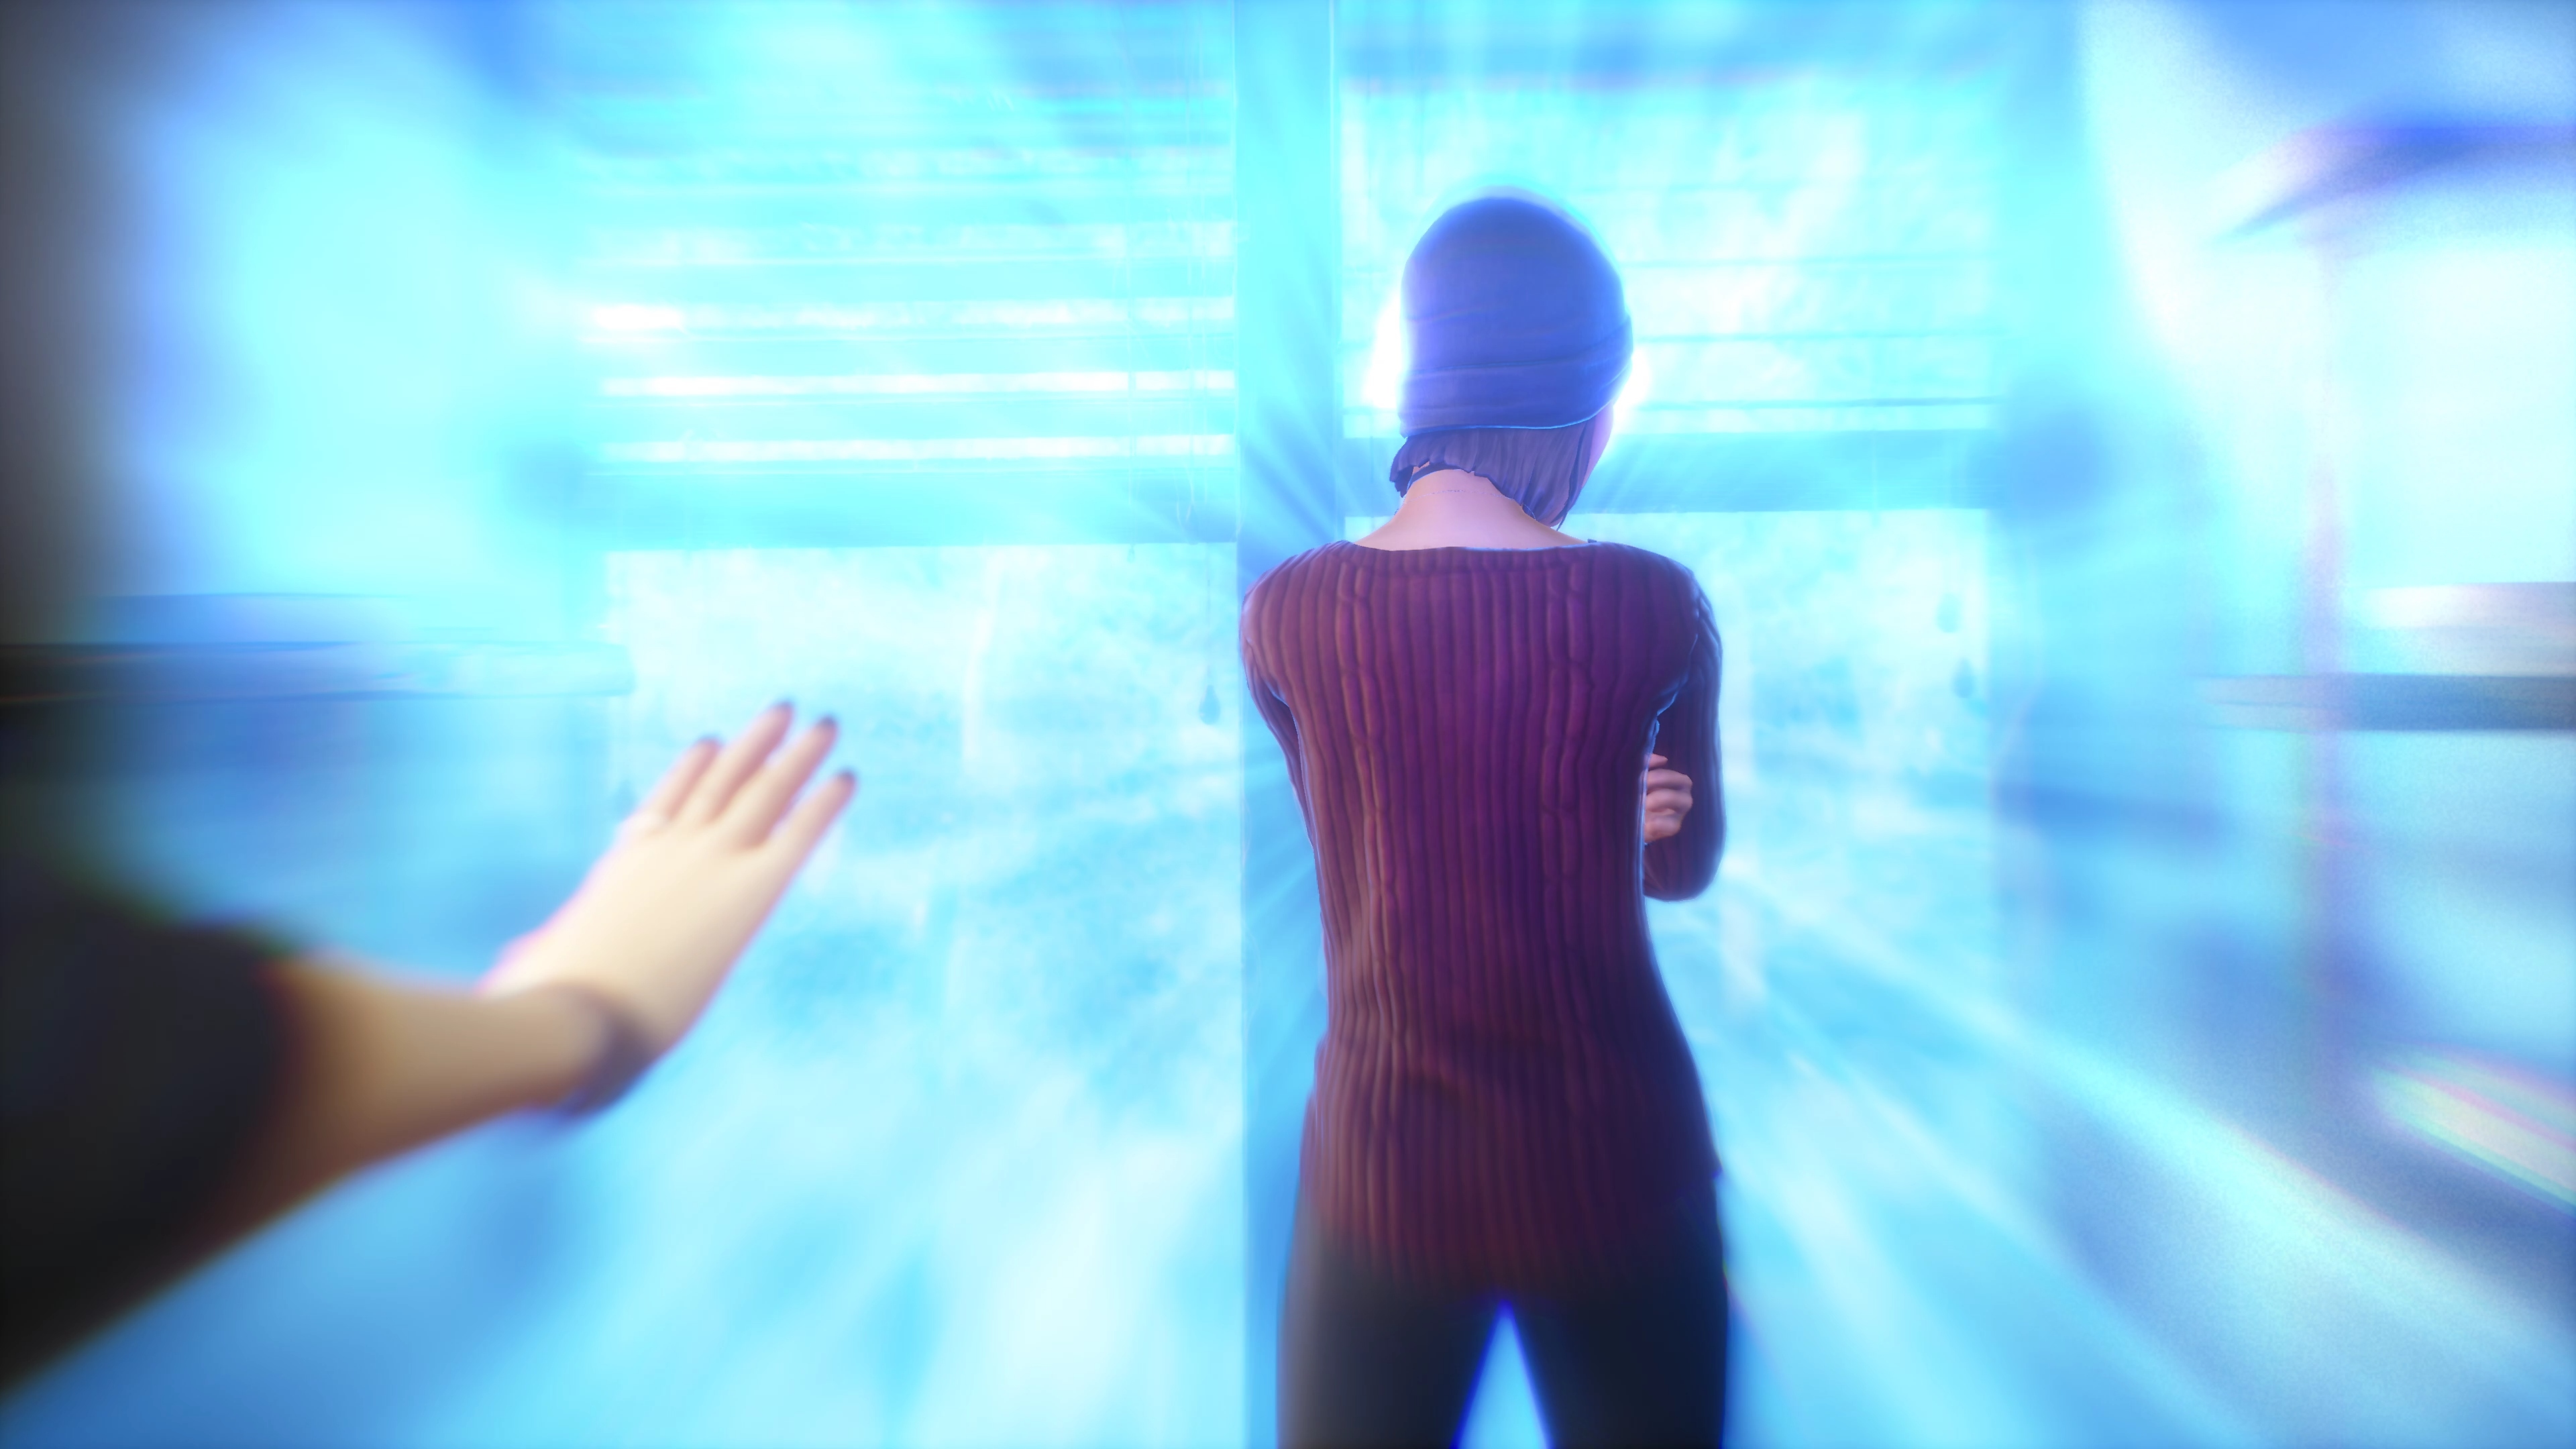 Life Is Strange True Colors screenshot showing Alex sensing another characters emotions, shown as a blue aura